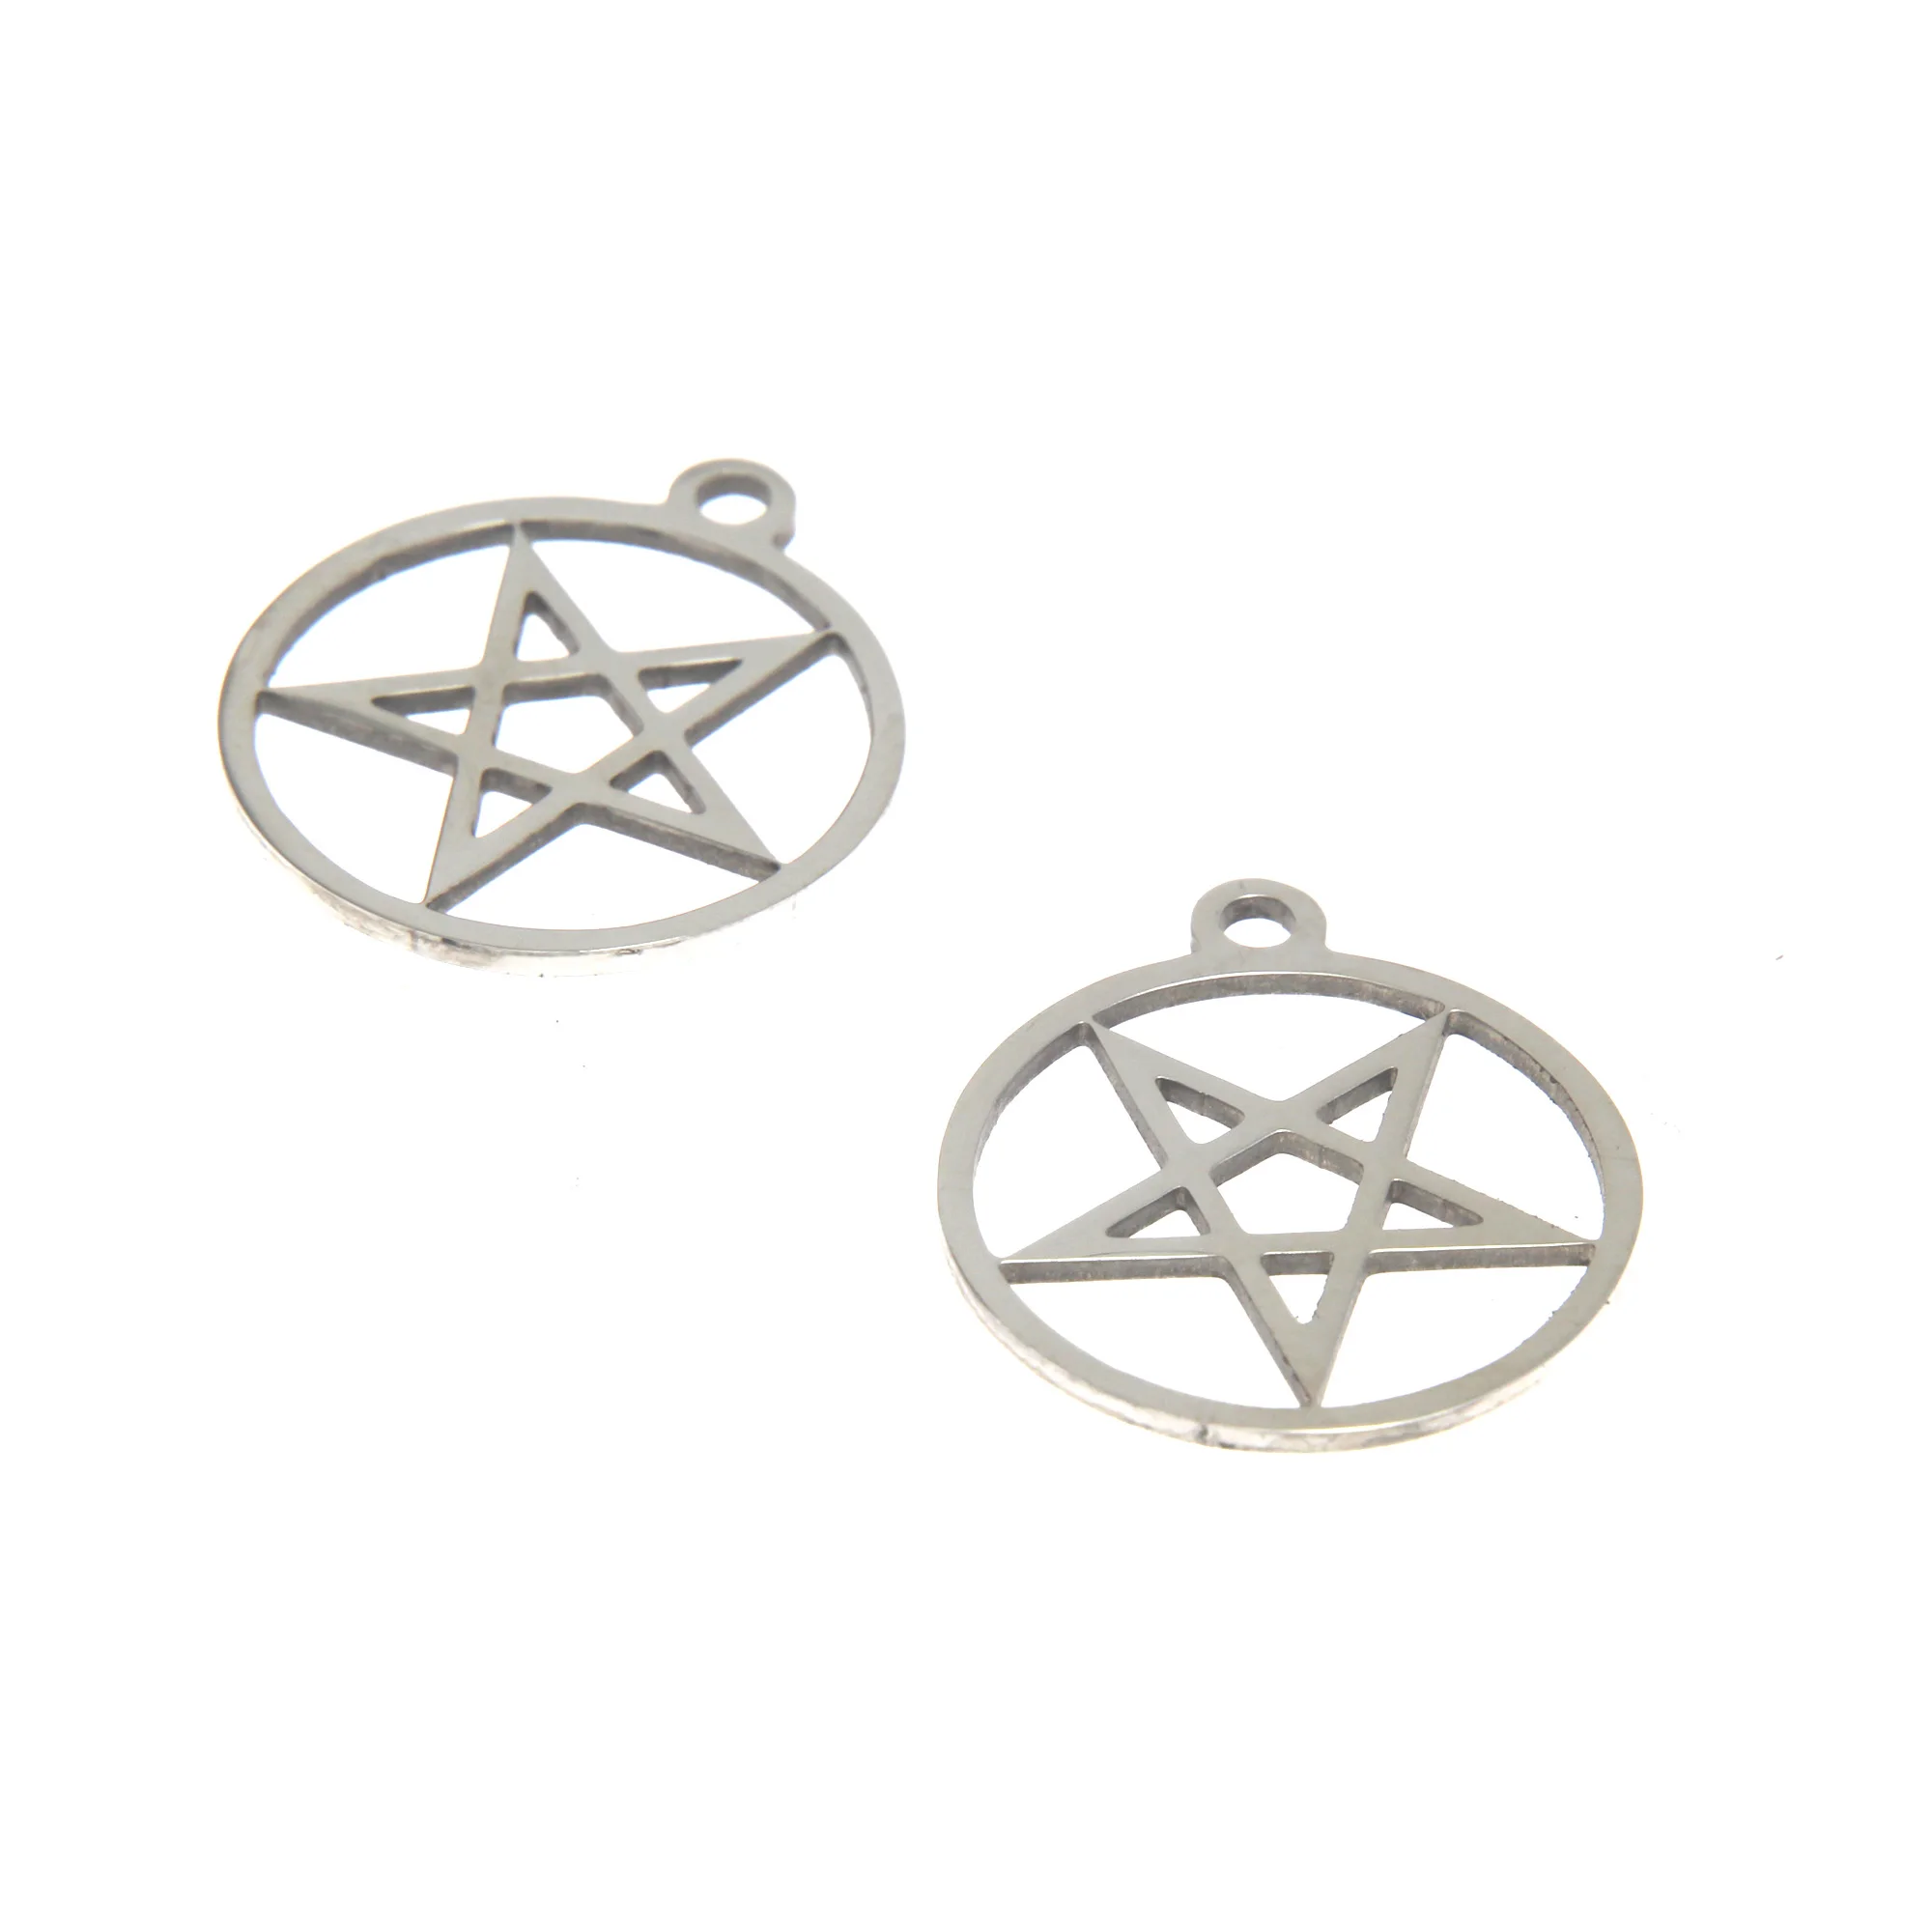 

5Pieces/Lot Inverted Pentacle Pentagram Charm Pagan Wiccan Stainless steel Pendant Fit for DIY Jewelry Making crafted 18x20mm